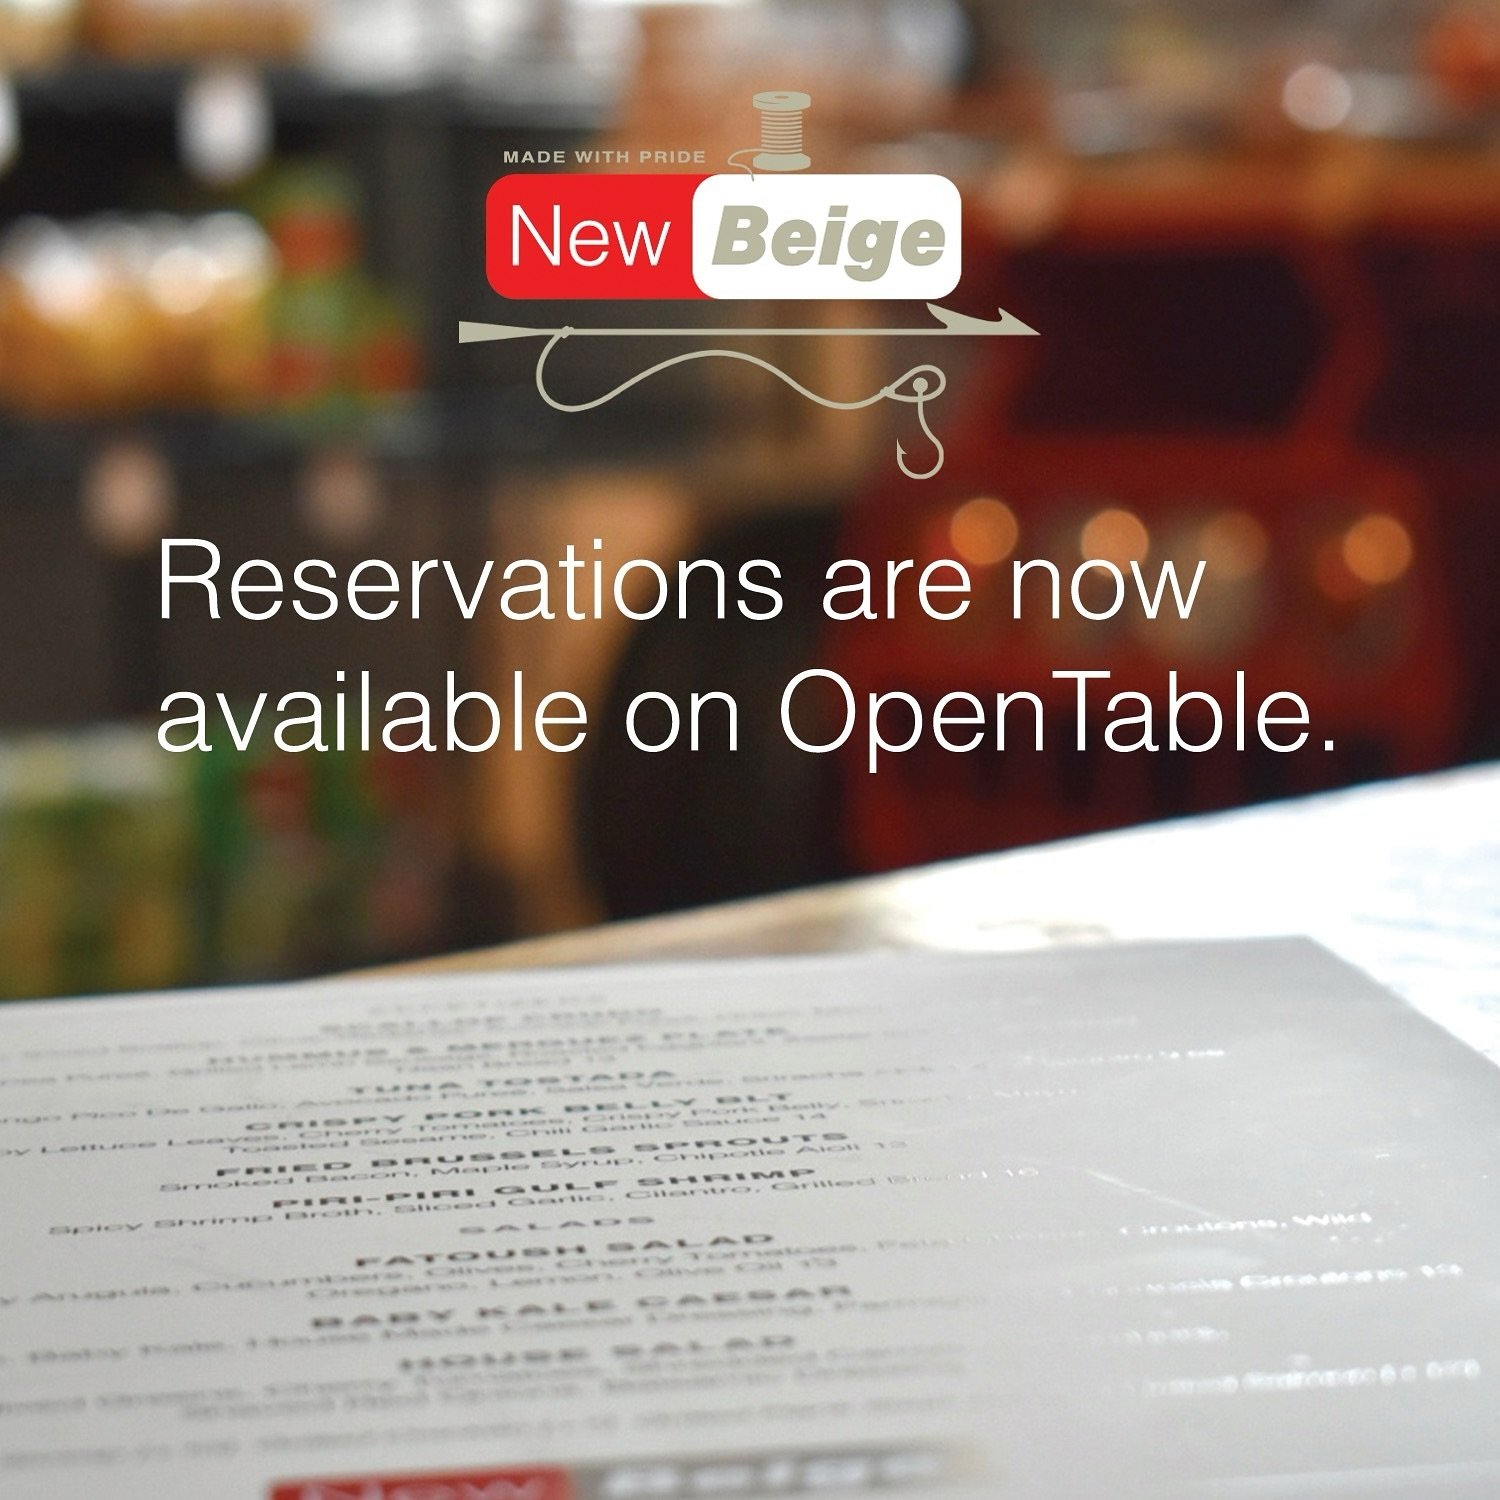 ❤️&zwj;🔥🍽️Update - New Beige is now on OpenTable! ❤️&zwj;🔥🍽️ Reserve your table now by clicking: www.tinyurl.com/newbeige

Open for dinner service every day starting at 4:30 PM, serving lunch on Saturday &amp; Sunday.

For Menus 📕: www.new-beige